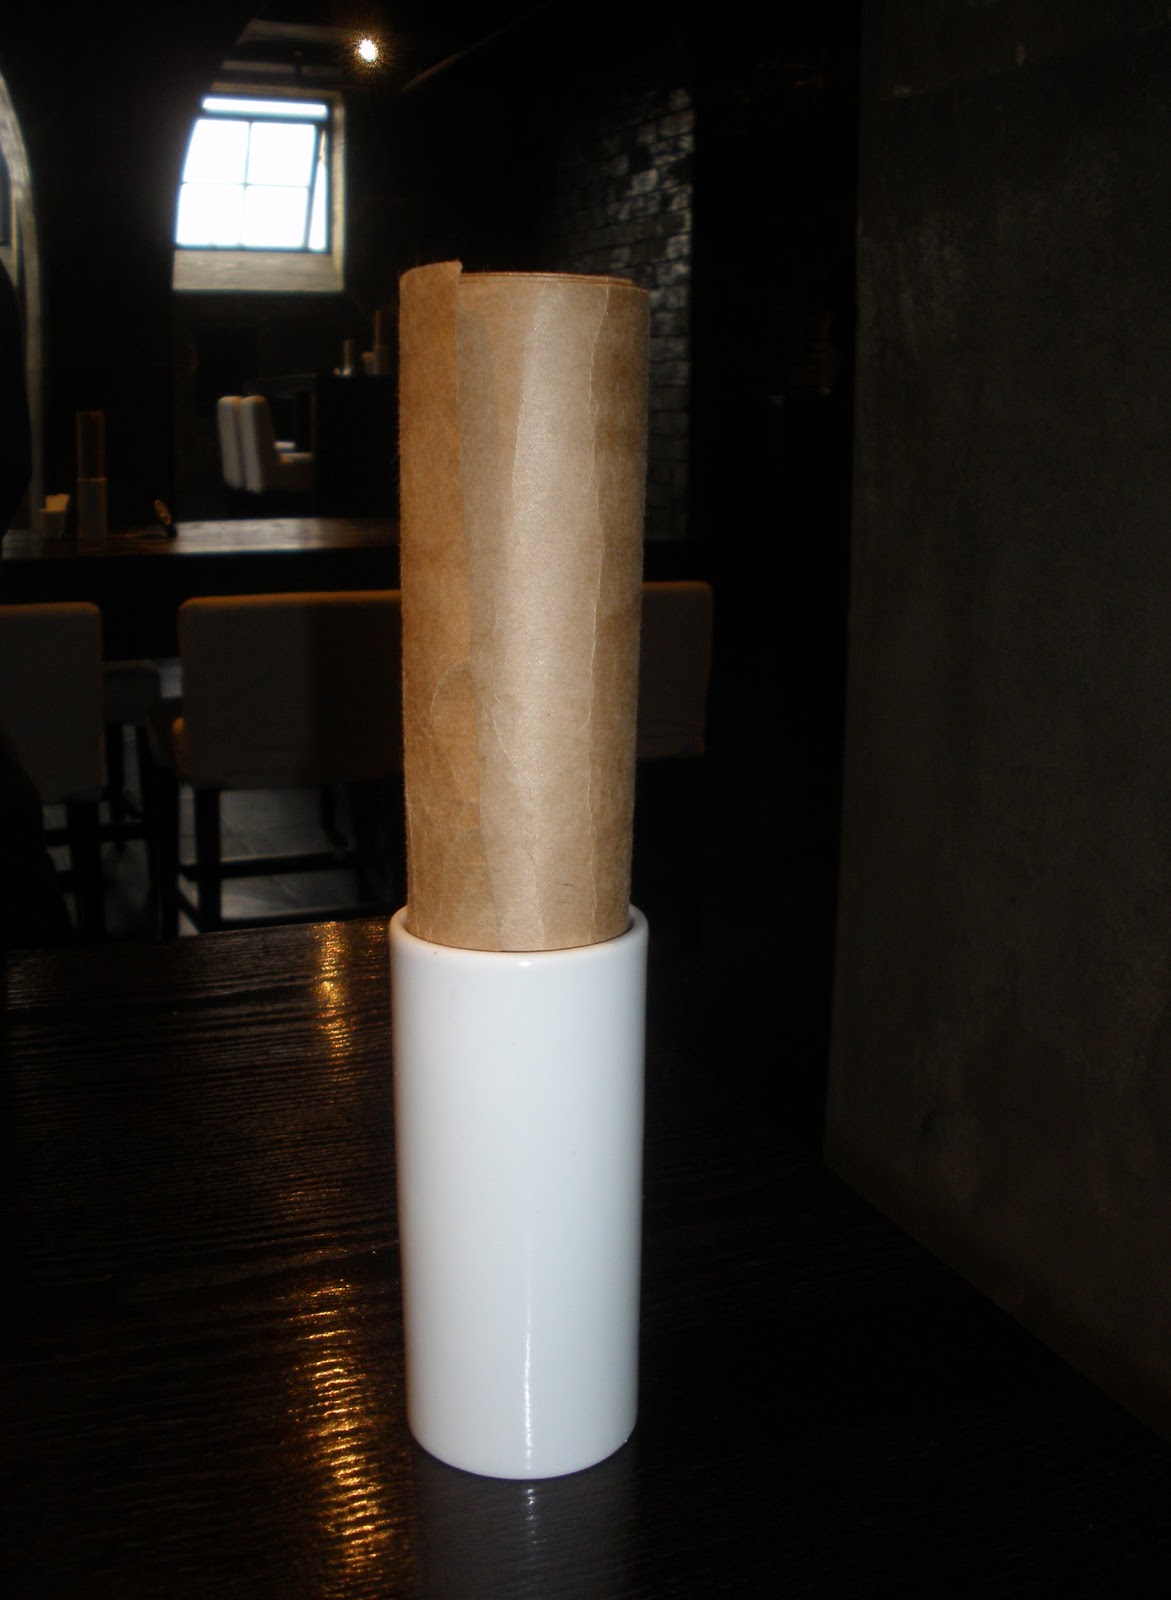 We had lunch here at the Noodle Bull, with a rolled up paper menu: